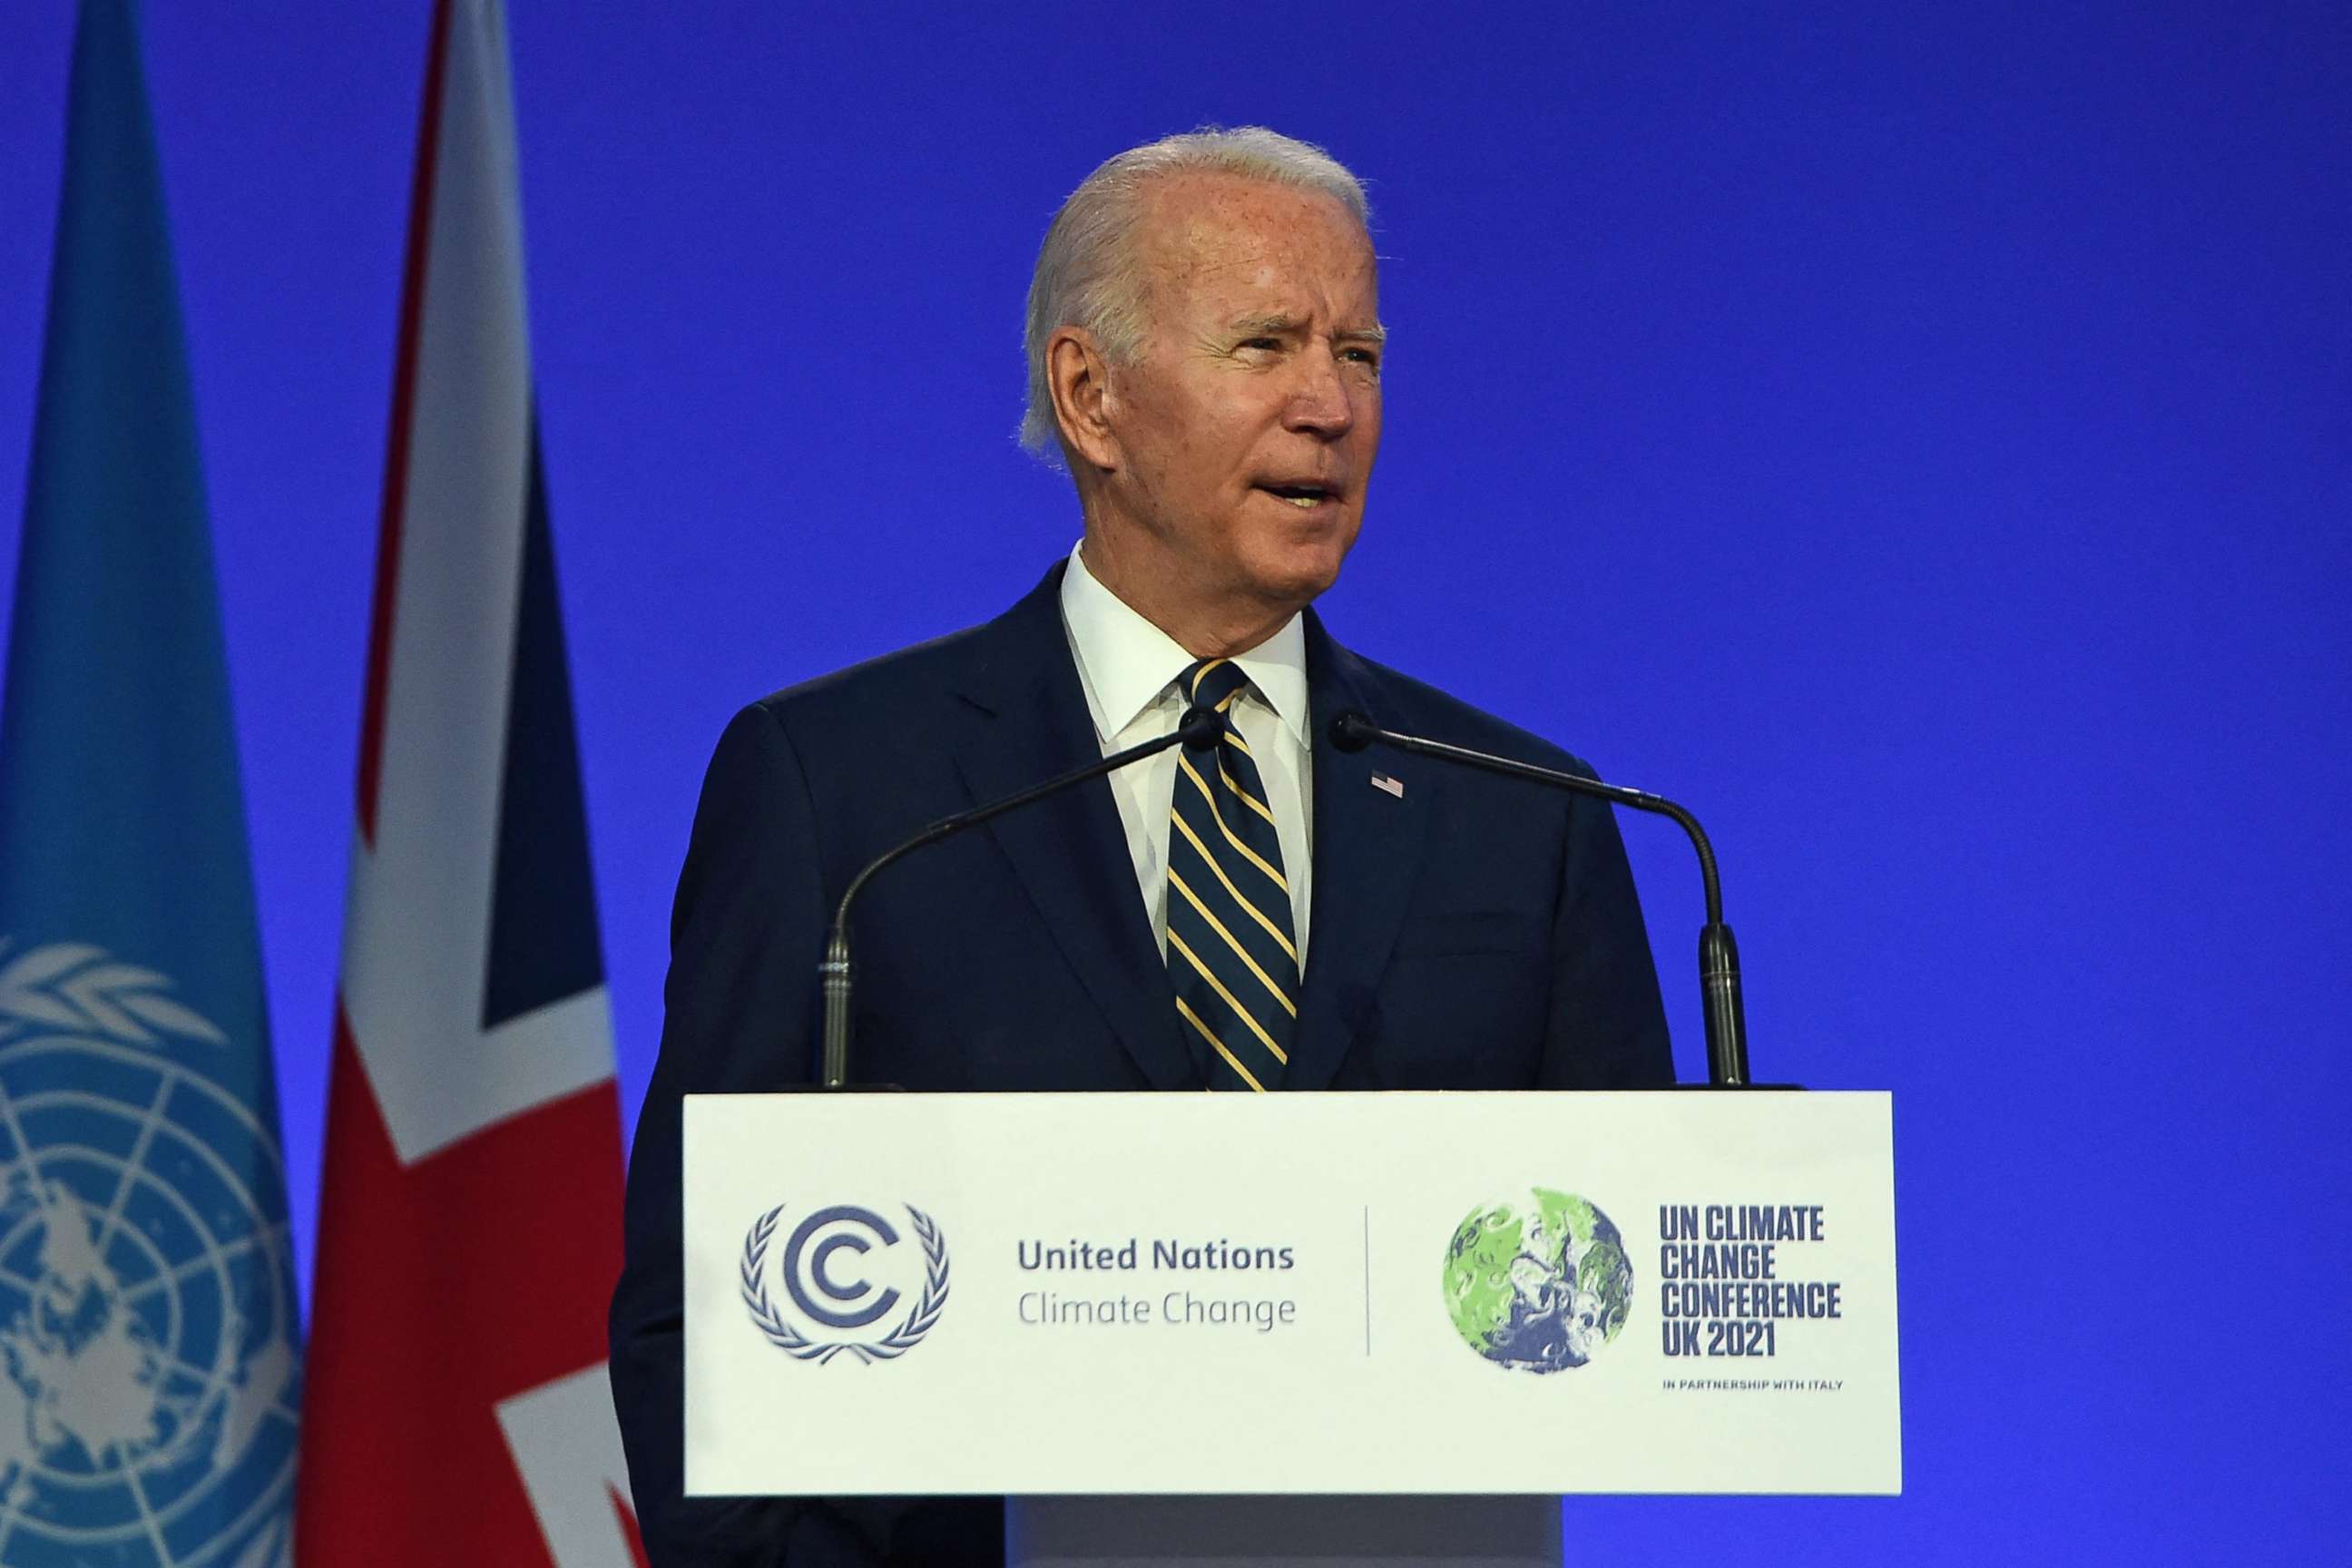 PHOTO: President Joe Biden presents his national statement as part of the World Leaders' Summit of the COP26 UN Climate Change Conference in Glasgow, Scotland, Nov. 1, 2021.